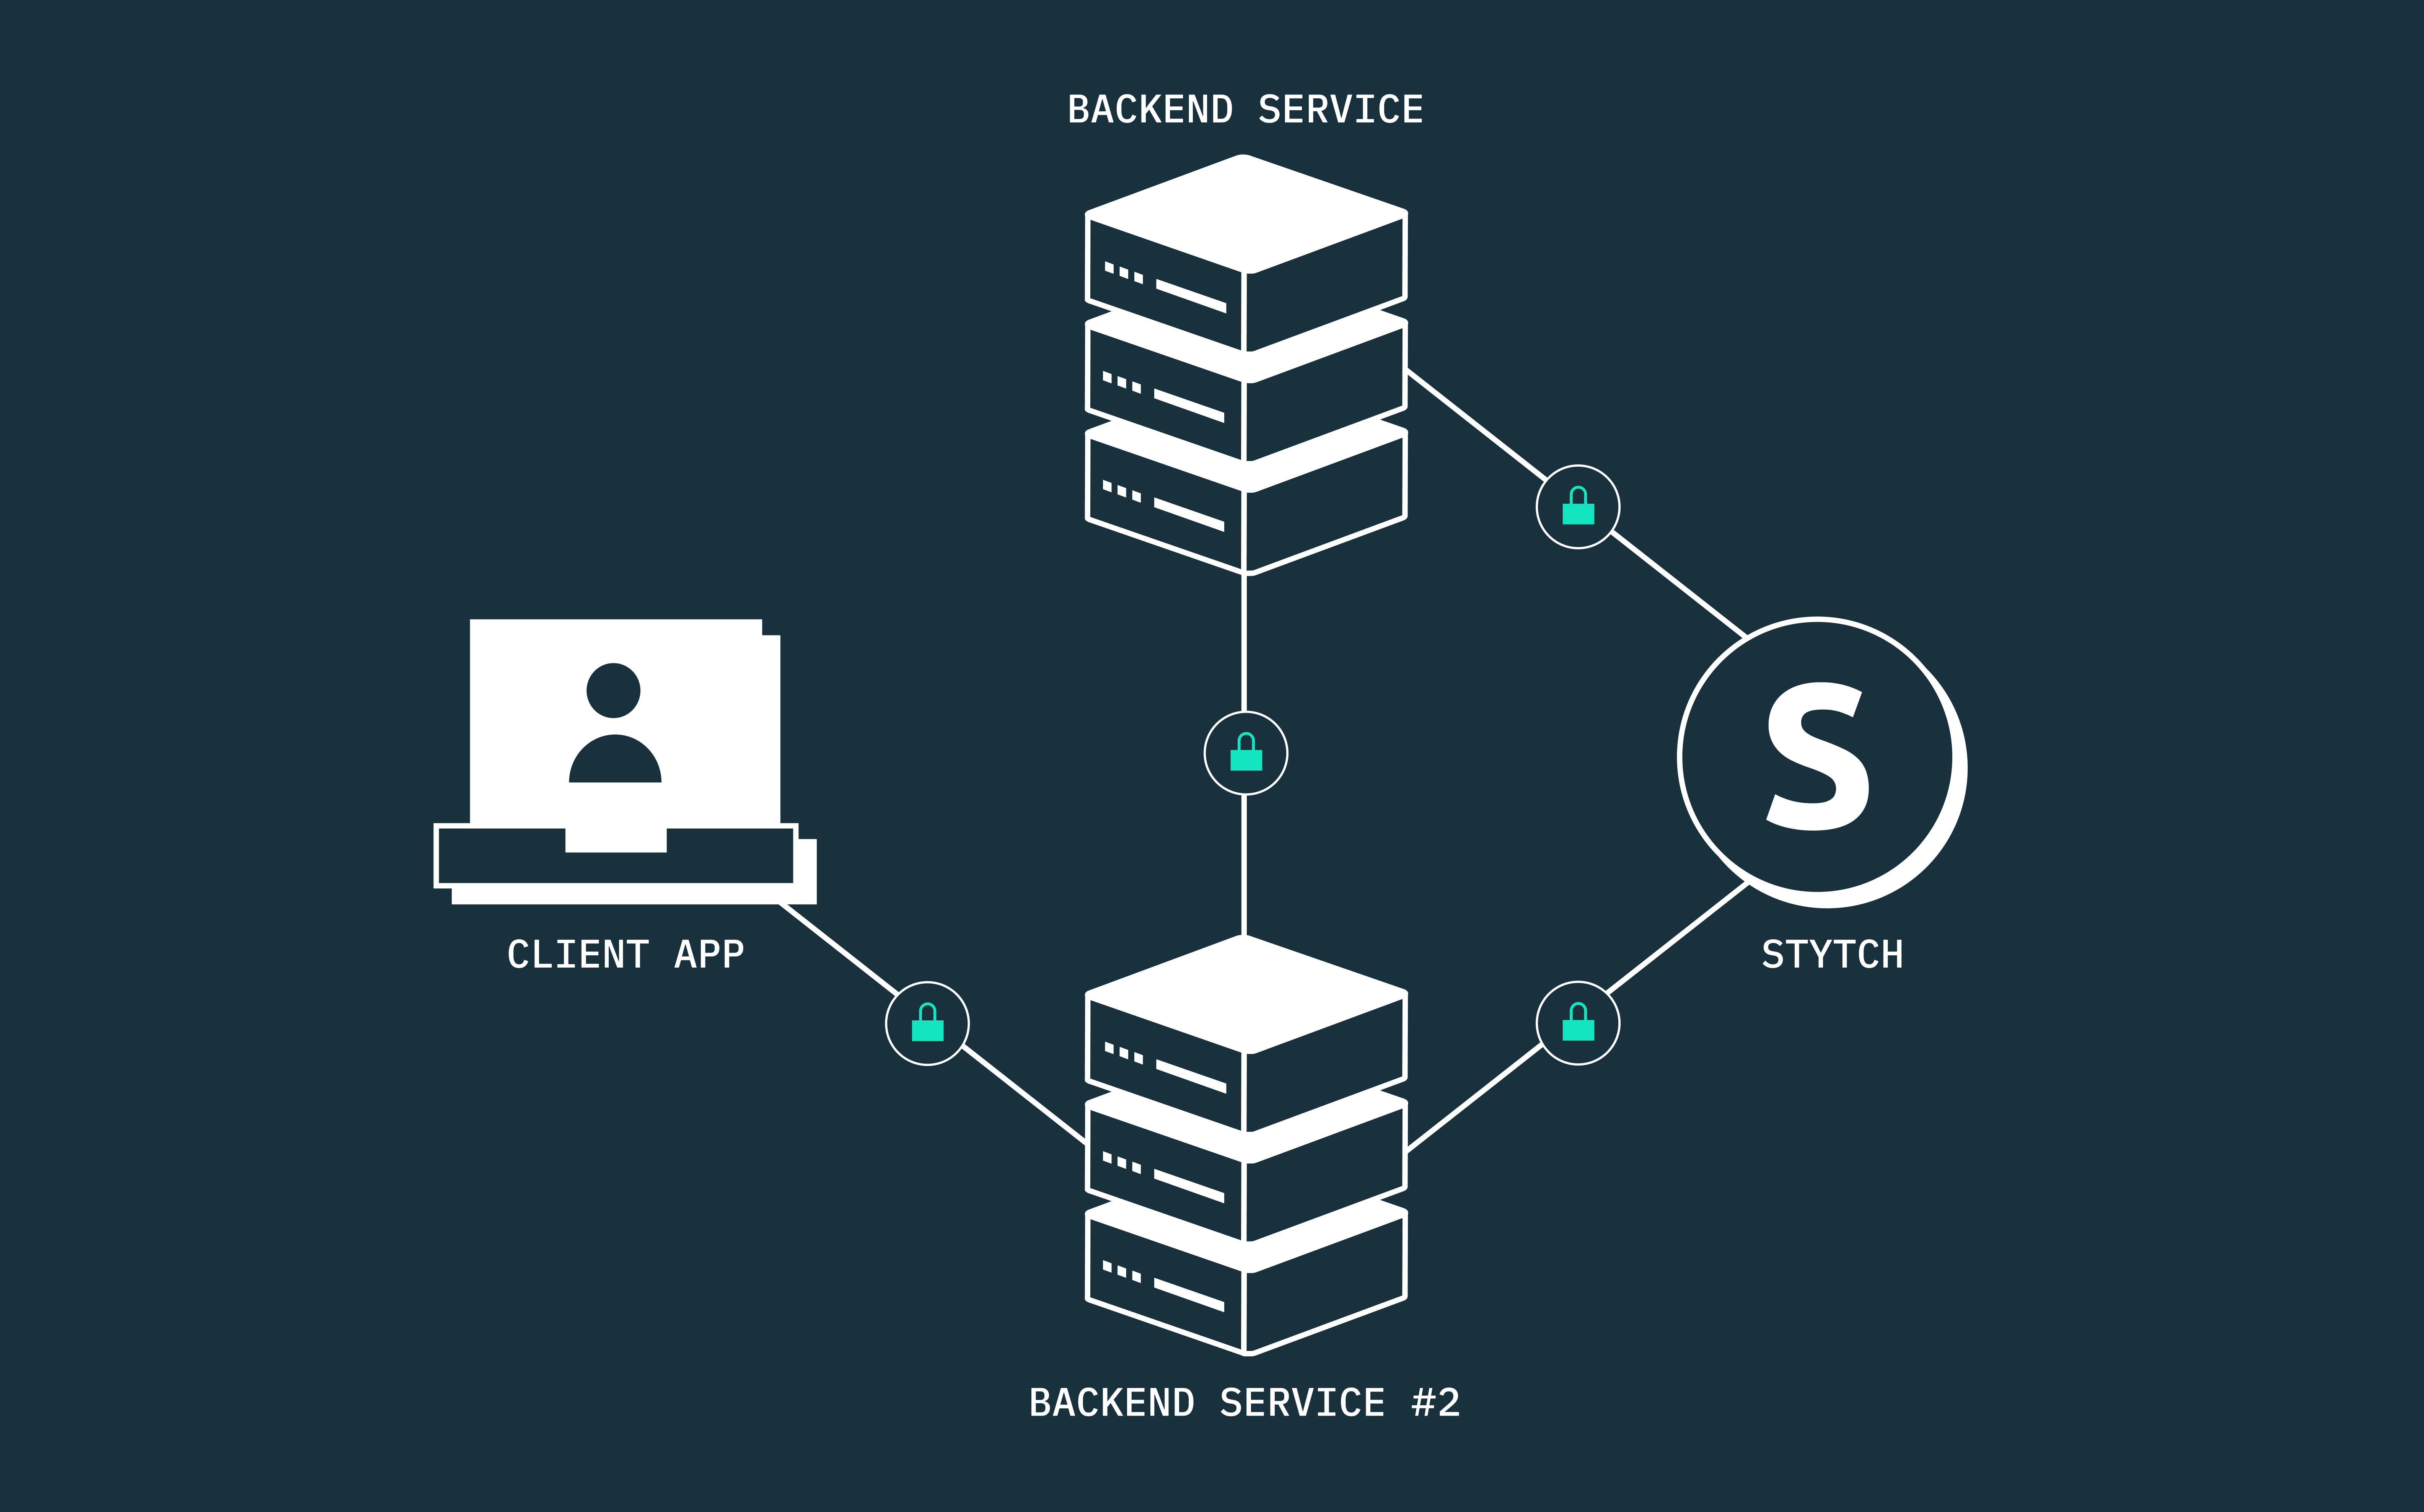 Diagram of Stytch M2M authentication flow between client app, Stytch server, and backend microservices.